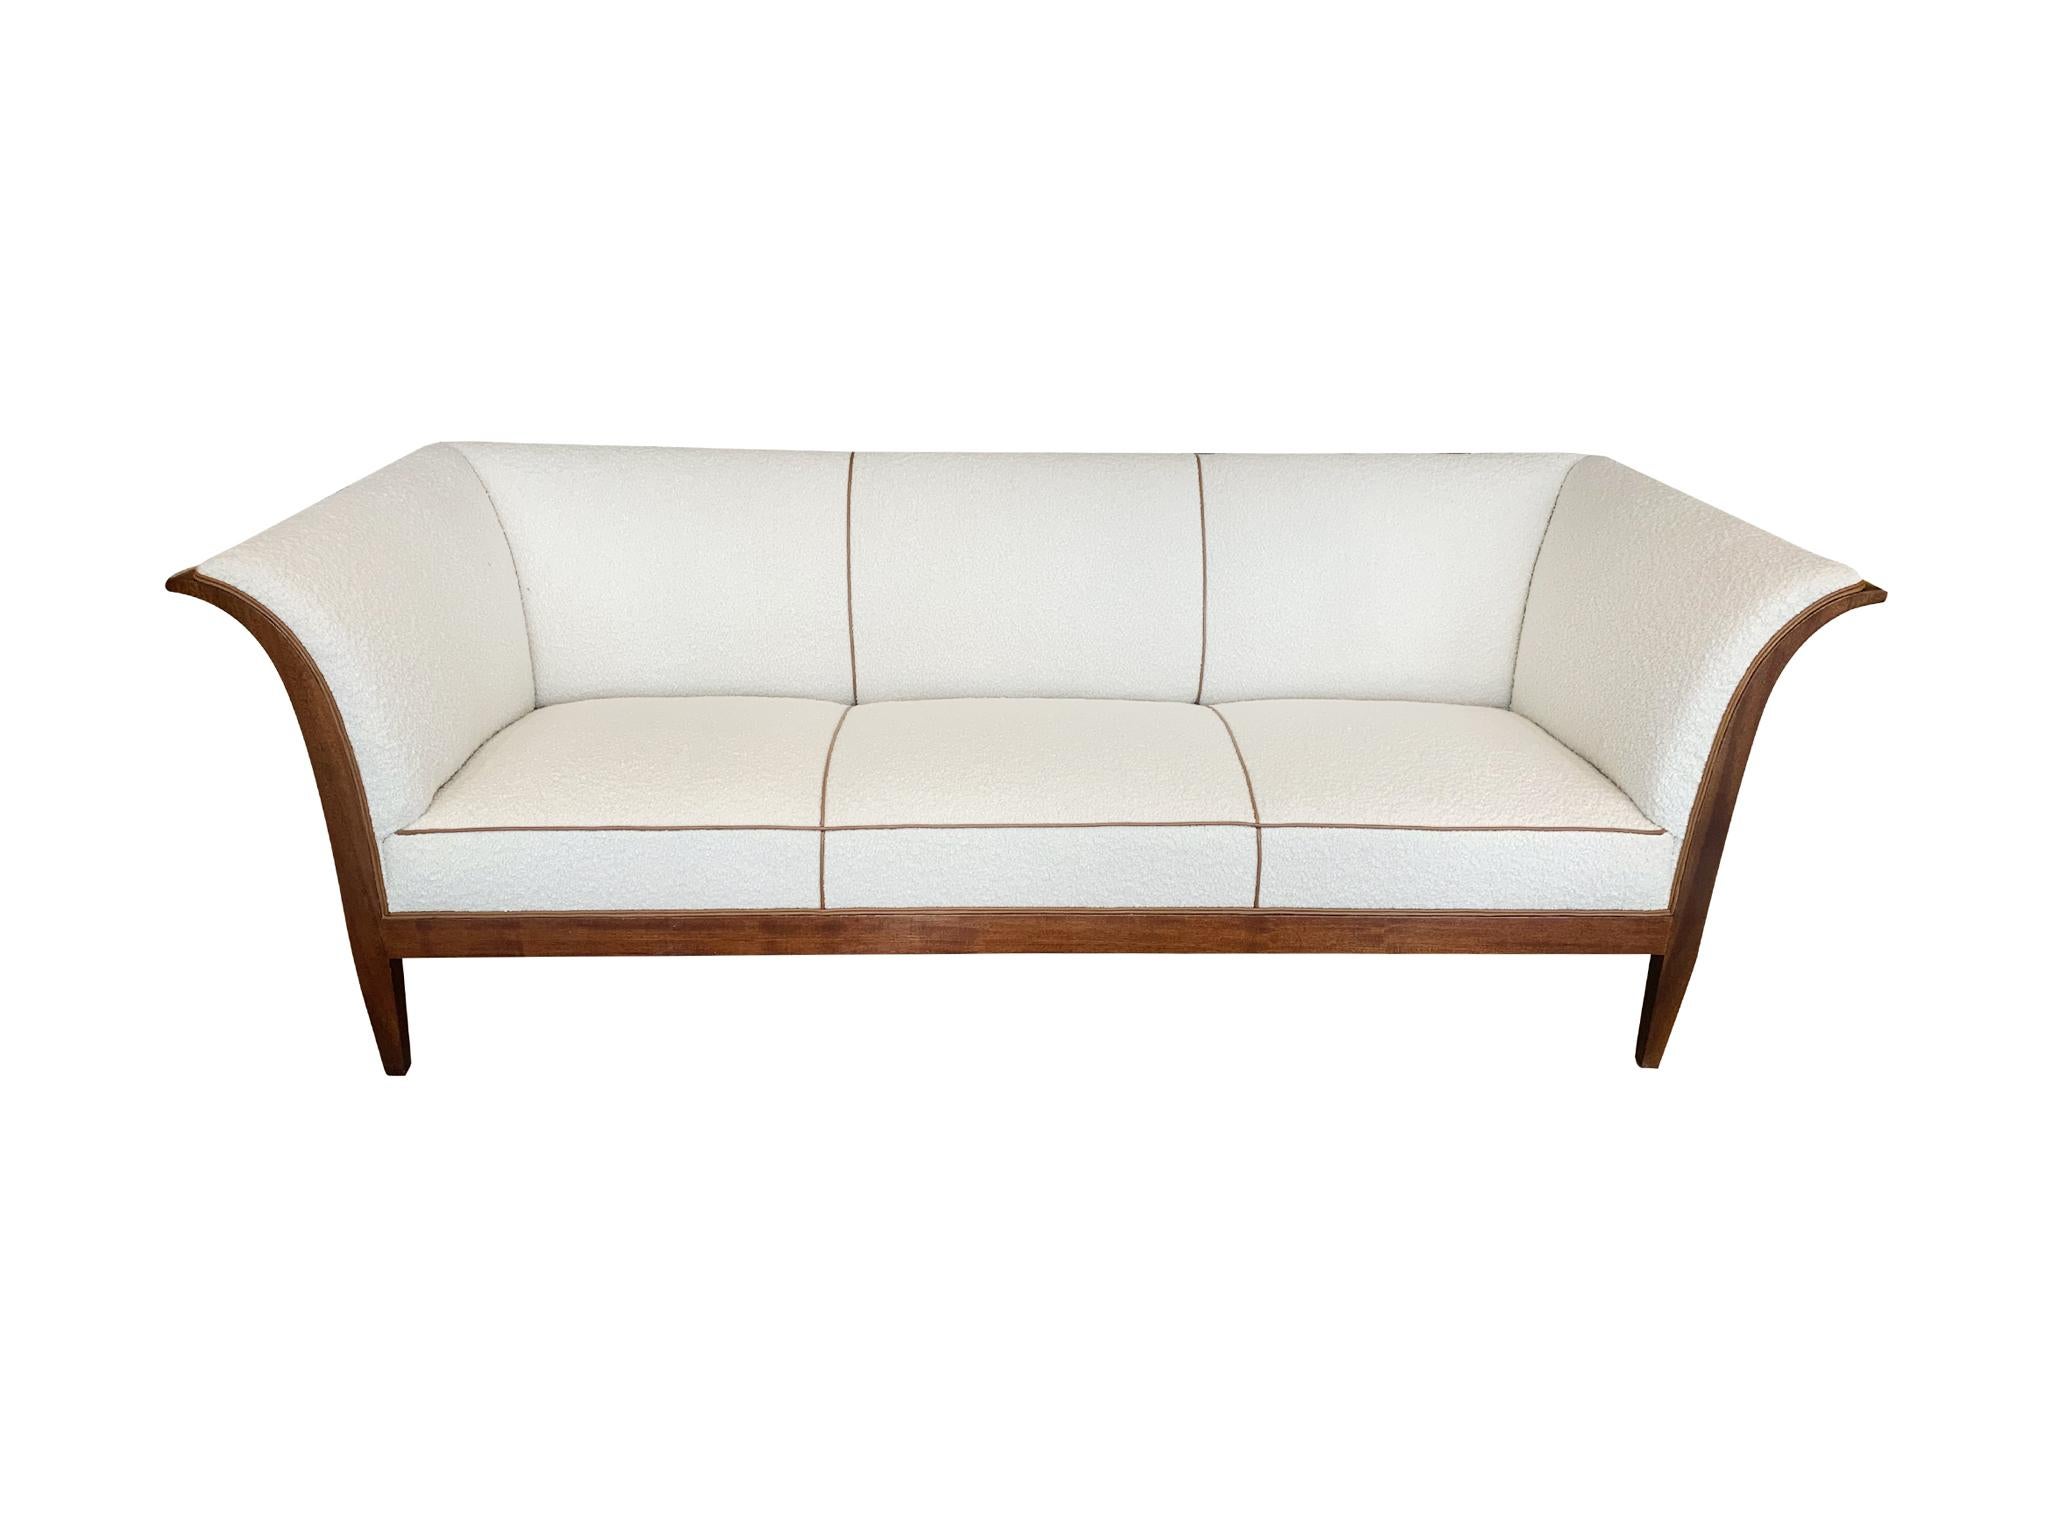 1940s Danish Modern Sofa by Frits Henningsen In Good Condition For Sale In New York, NY